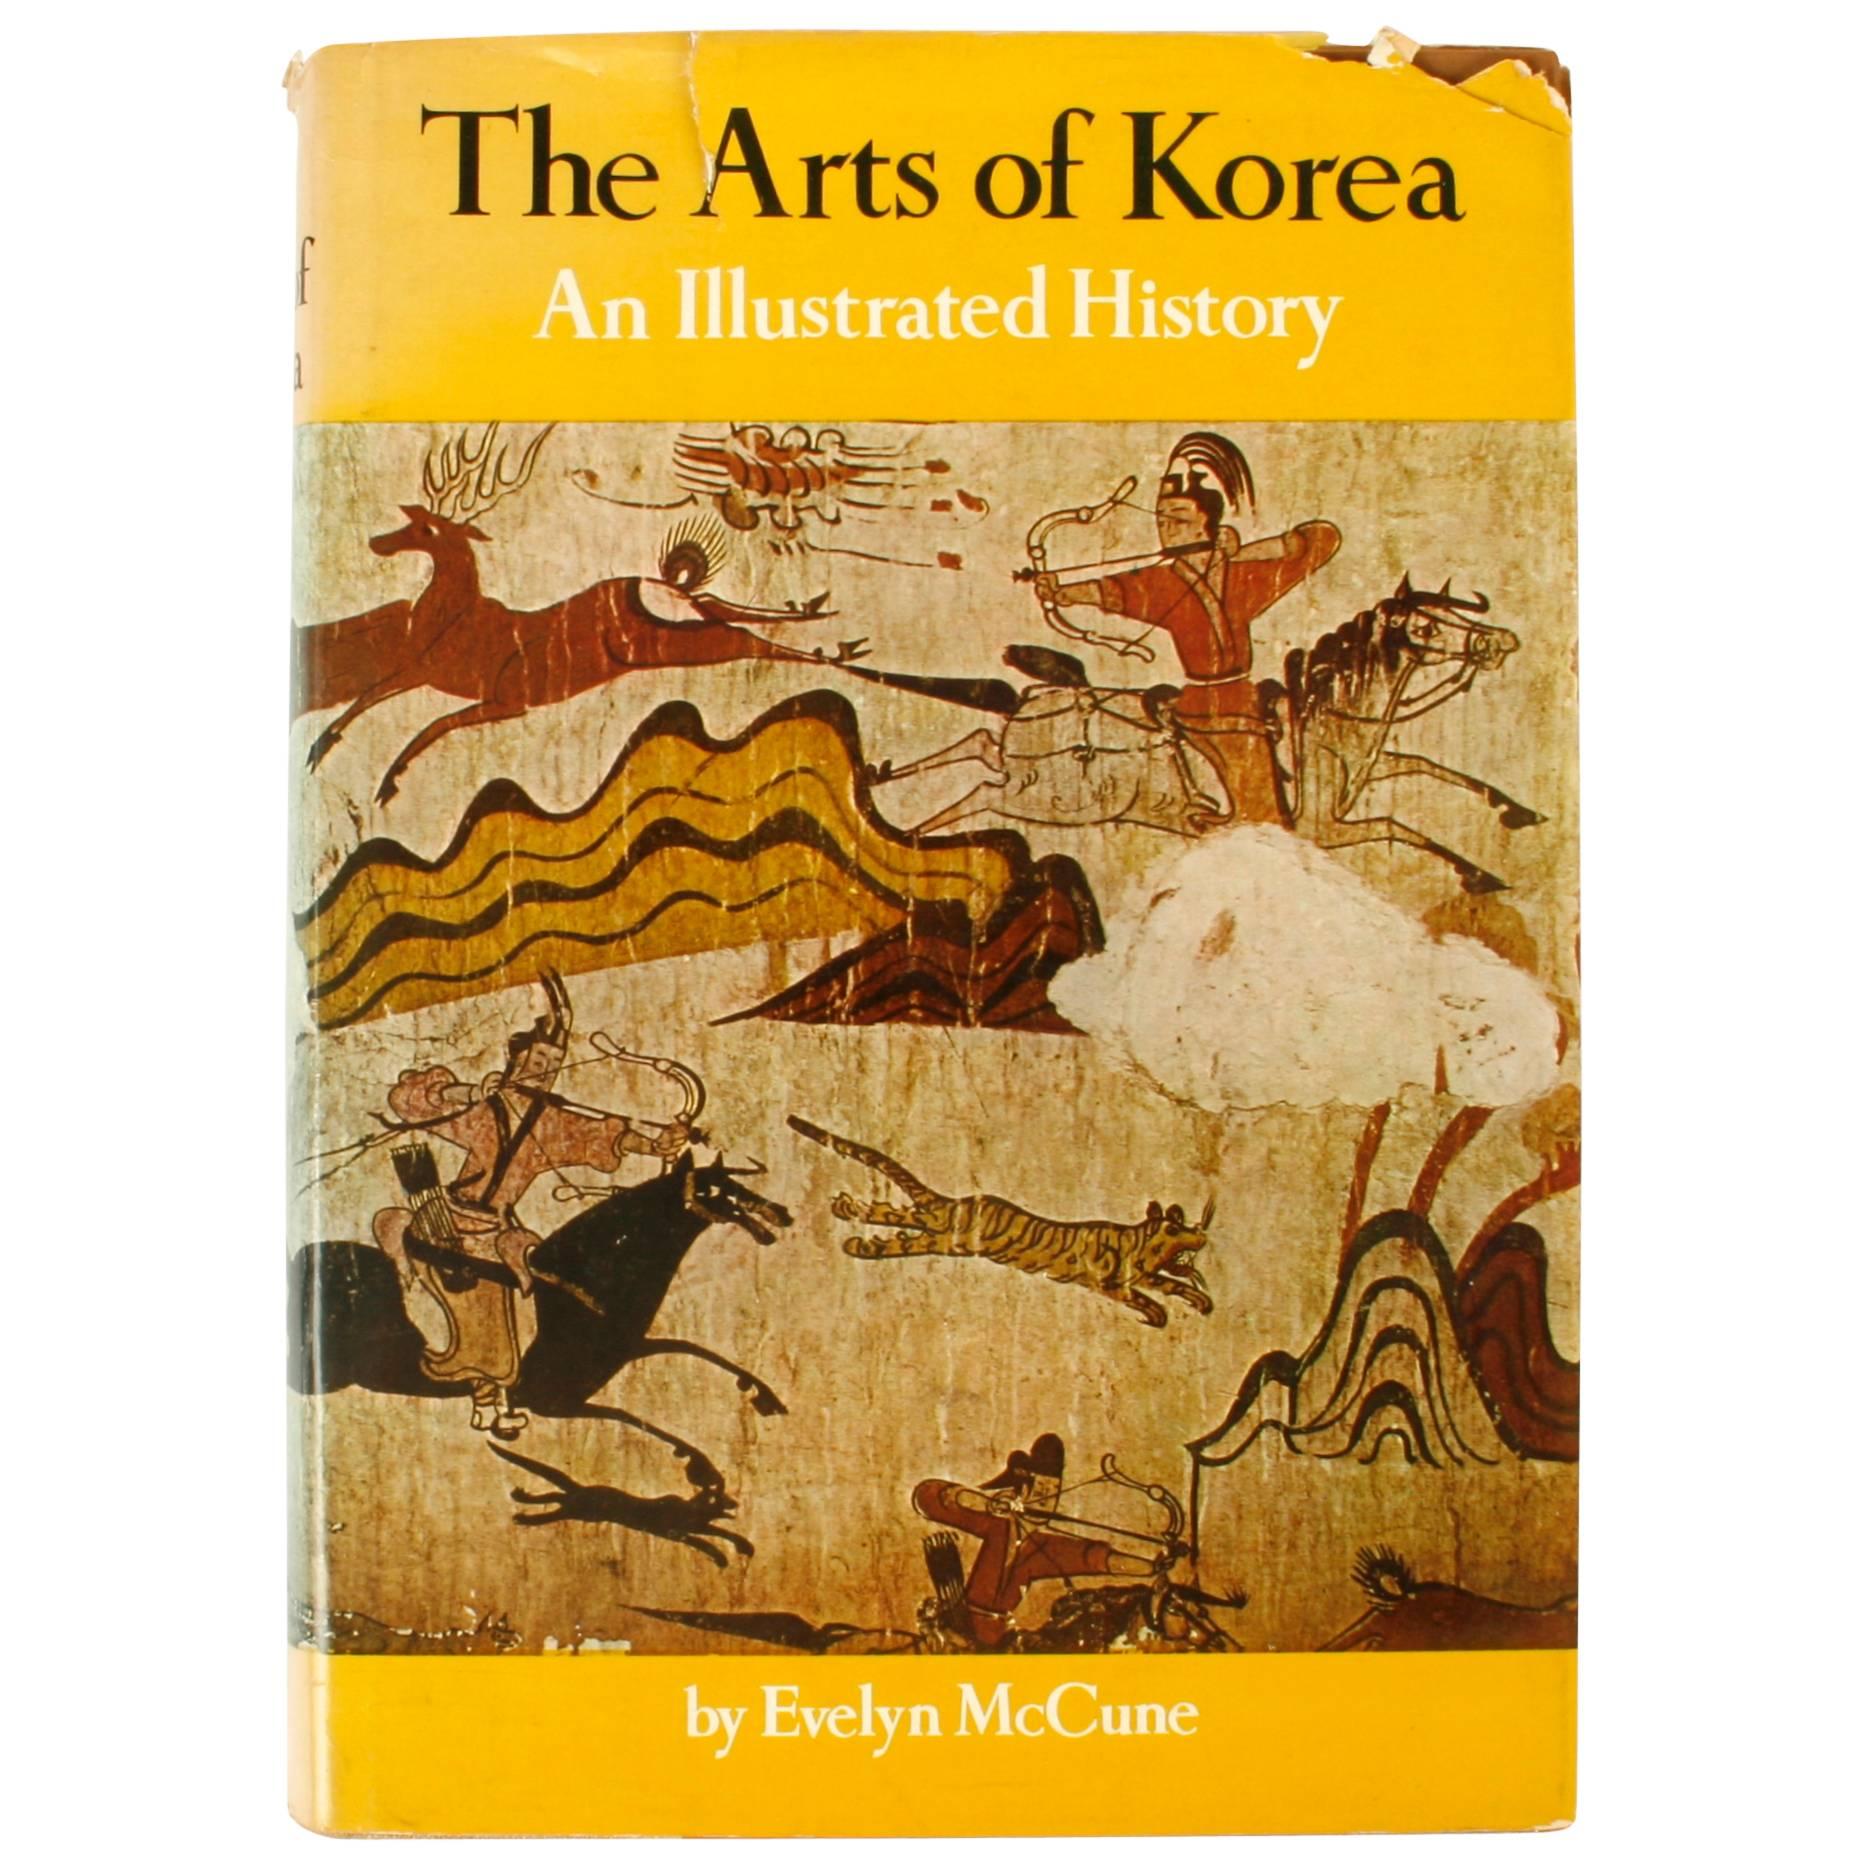 "Arts of Korea, An Illustrated History by Evelyn McCune" Book